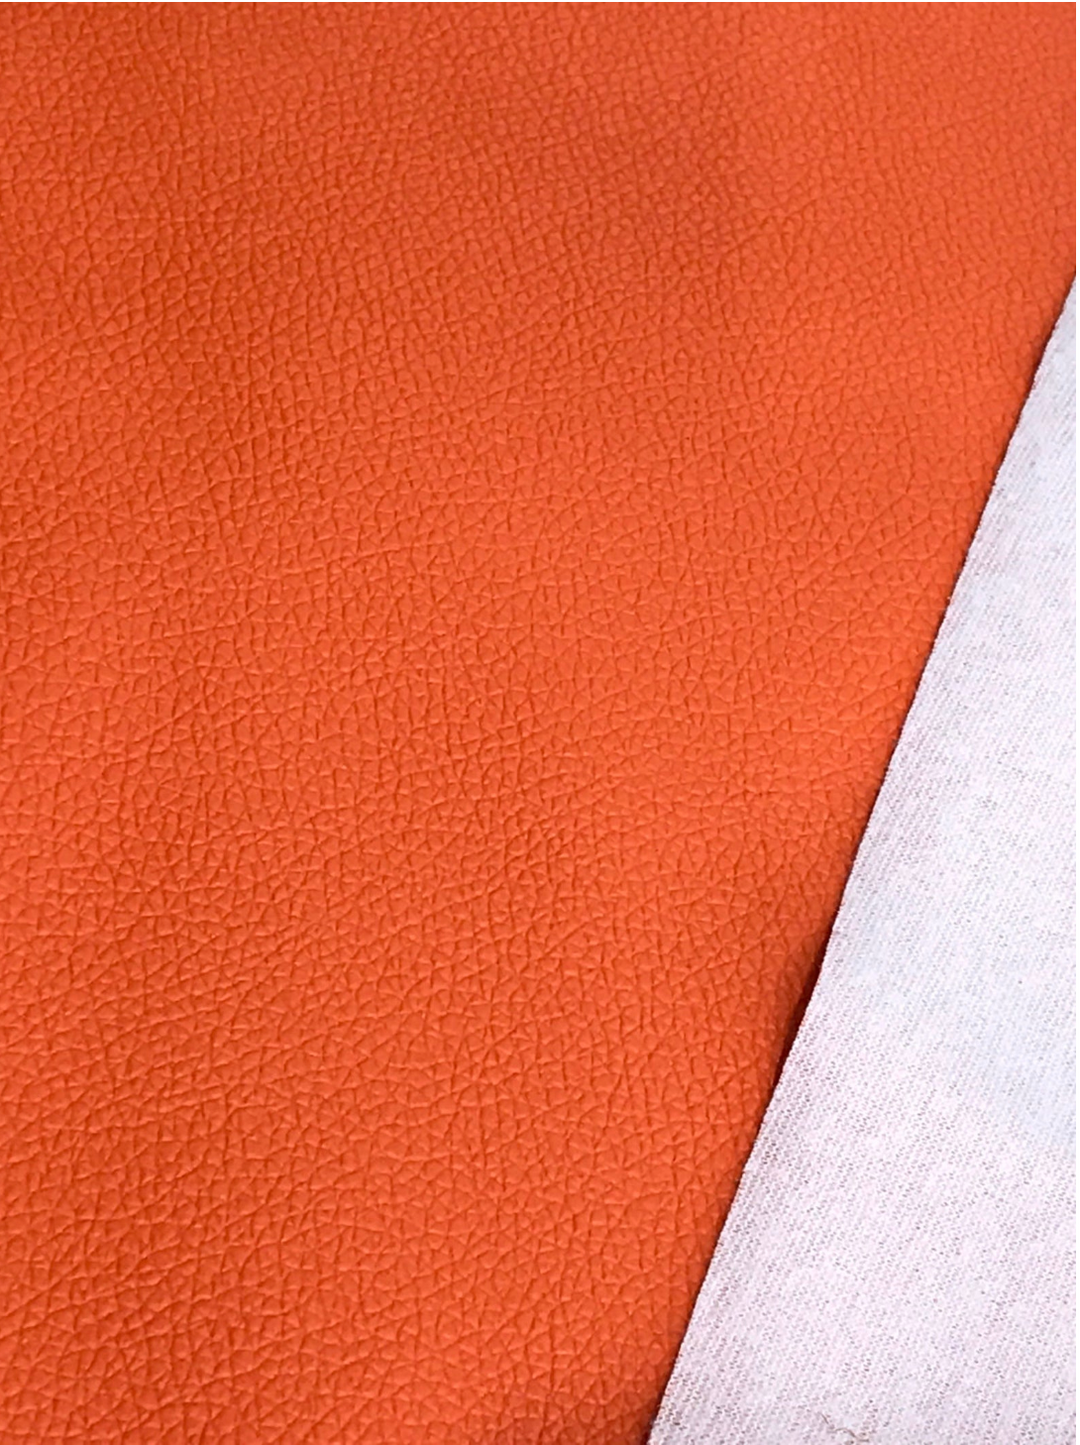 Orange Leatherette Sheet 0.7mm Thin A4 - 8X11 or A5 Size Small Lychee Print Orange Faux Leather Fabric Orange PU Leather Thin Leatherette